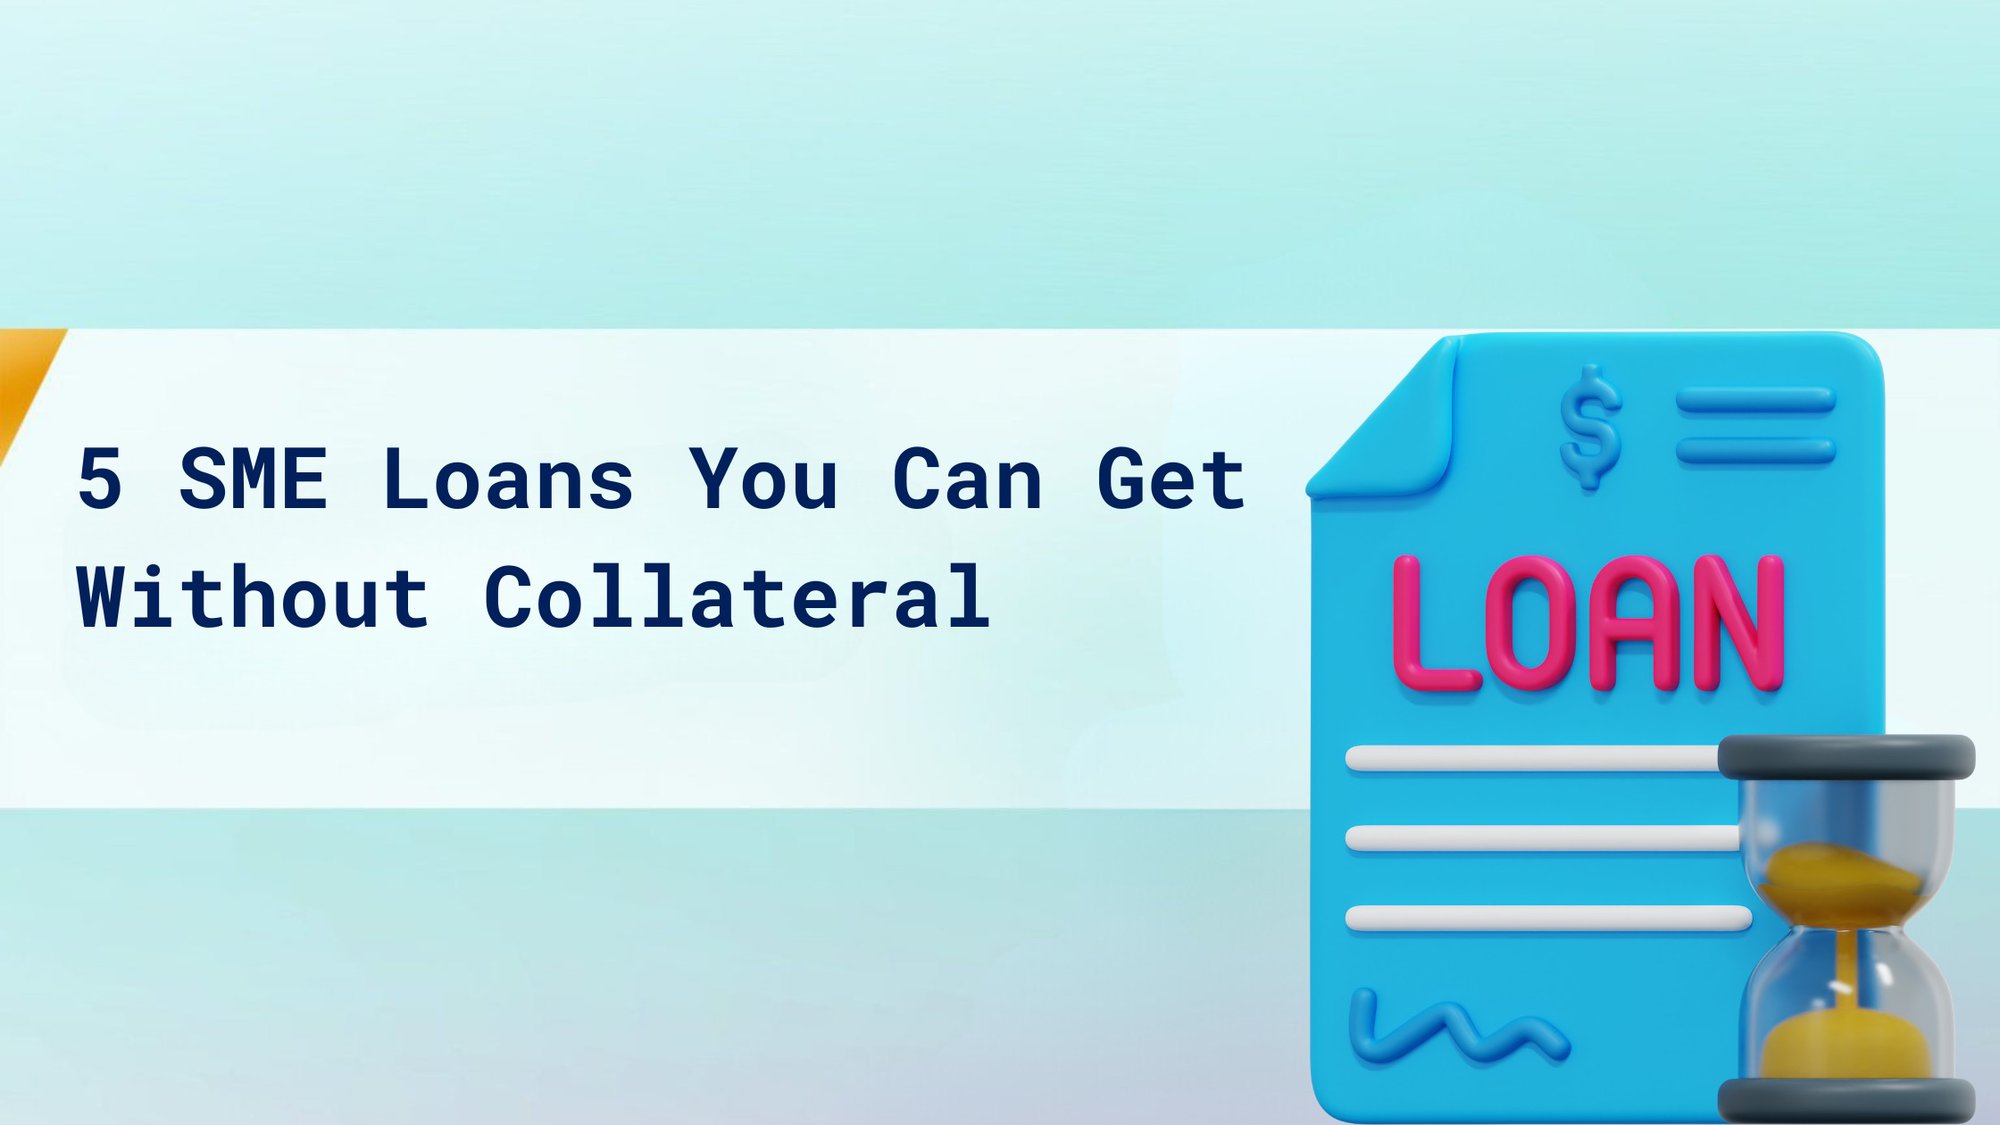 5 SME Loans You Can Get Without Collateral cover